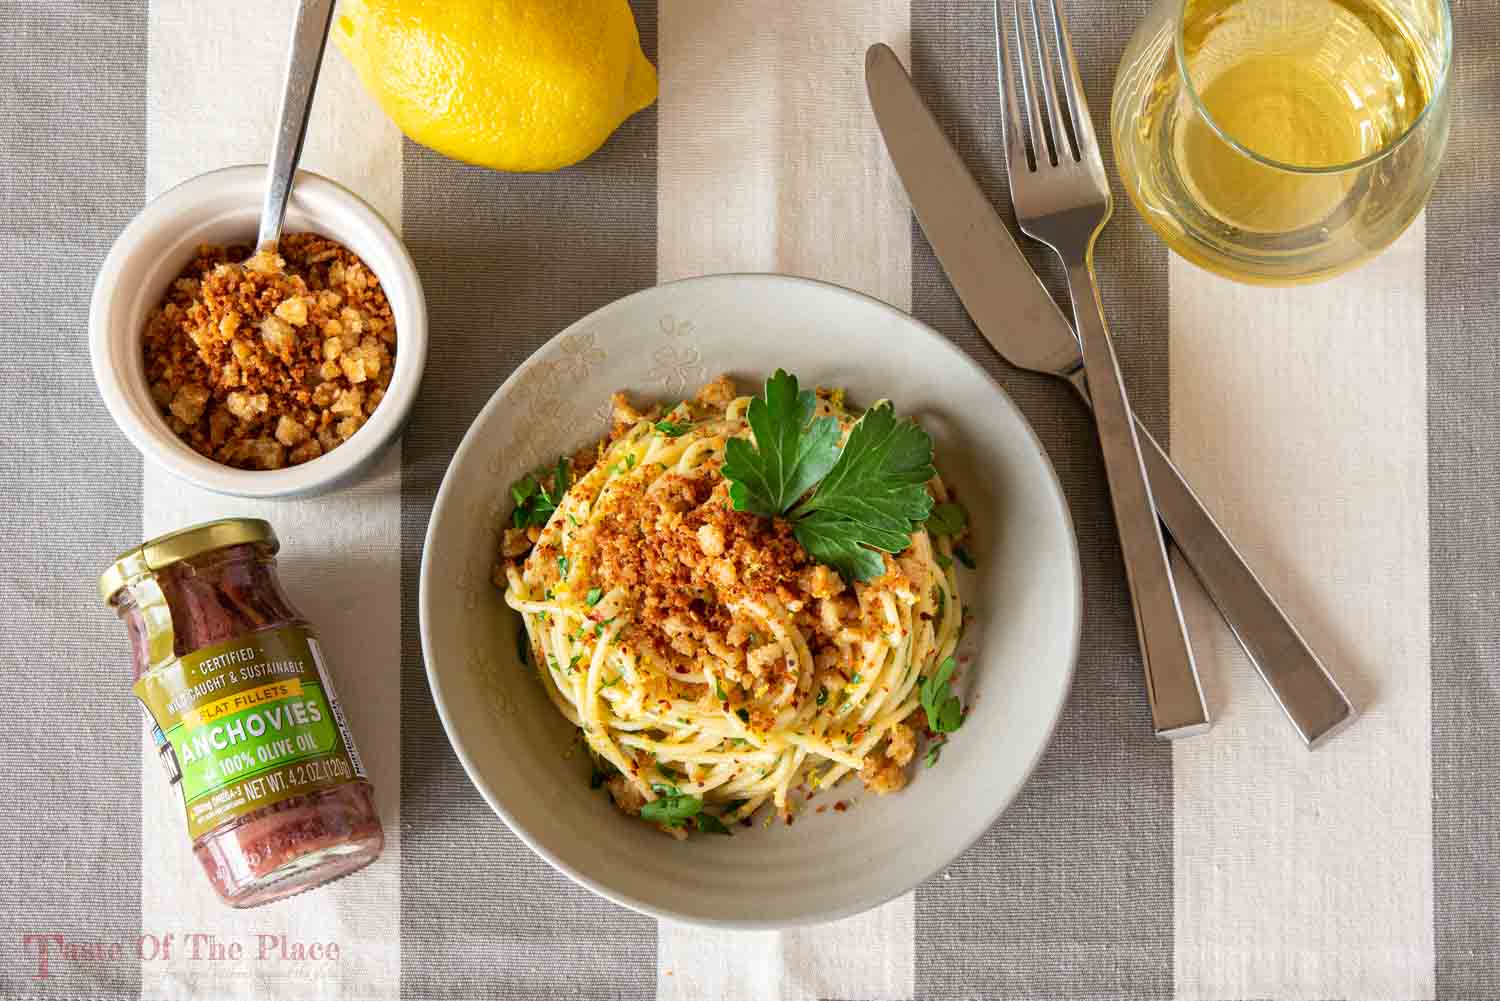 Sicilian-style spaghetti with anchovies and breadcrumbs